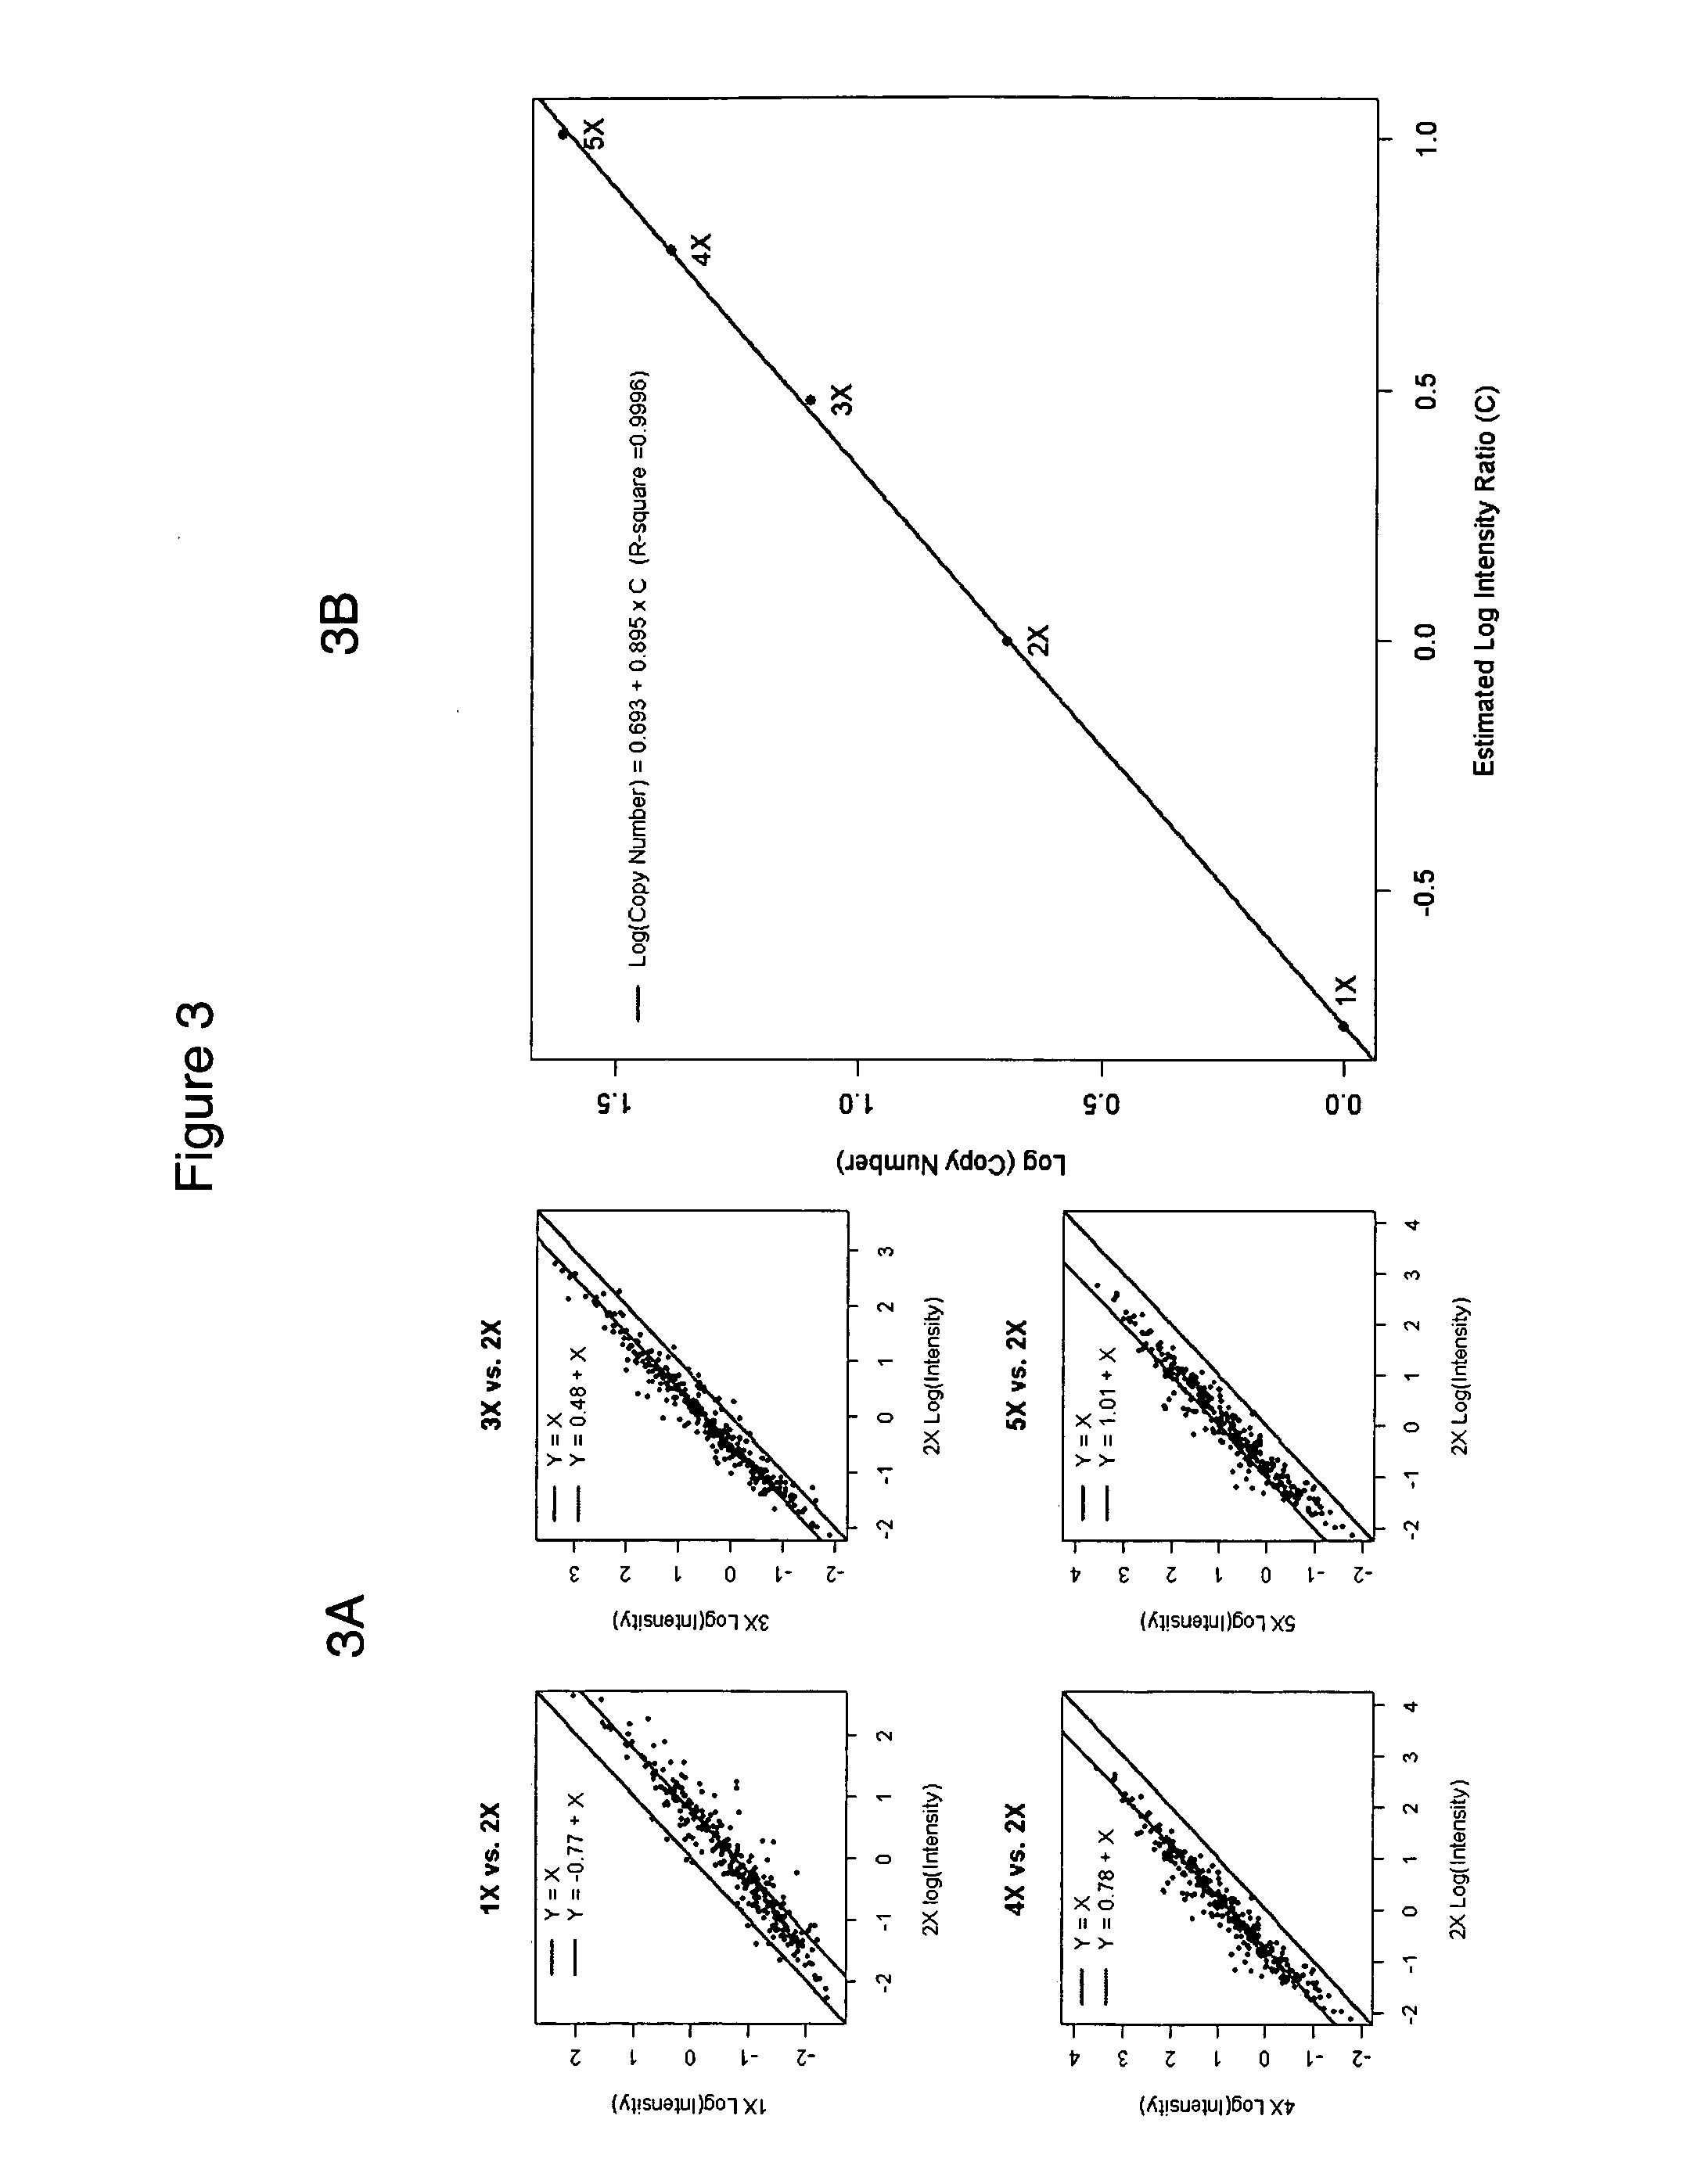 Methods for identifying DNA copy number changes